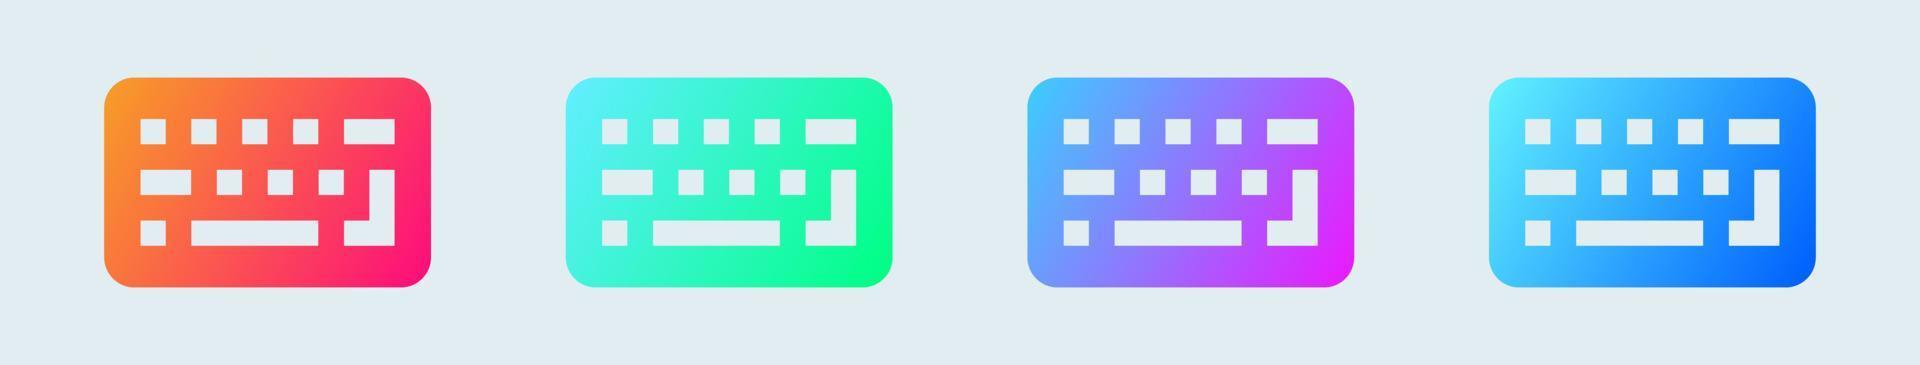 Keyboard solid icon in gradient colors. Computer button signs vector illustration.